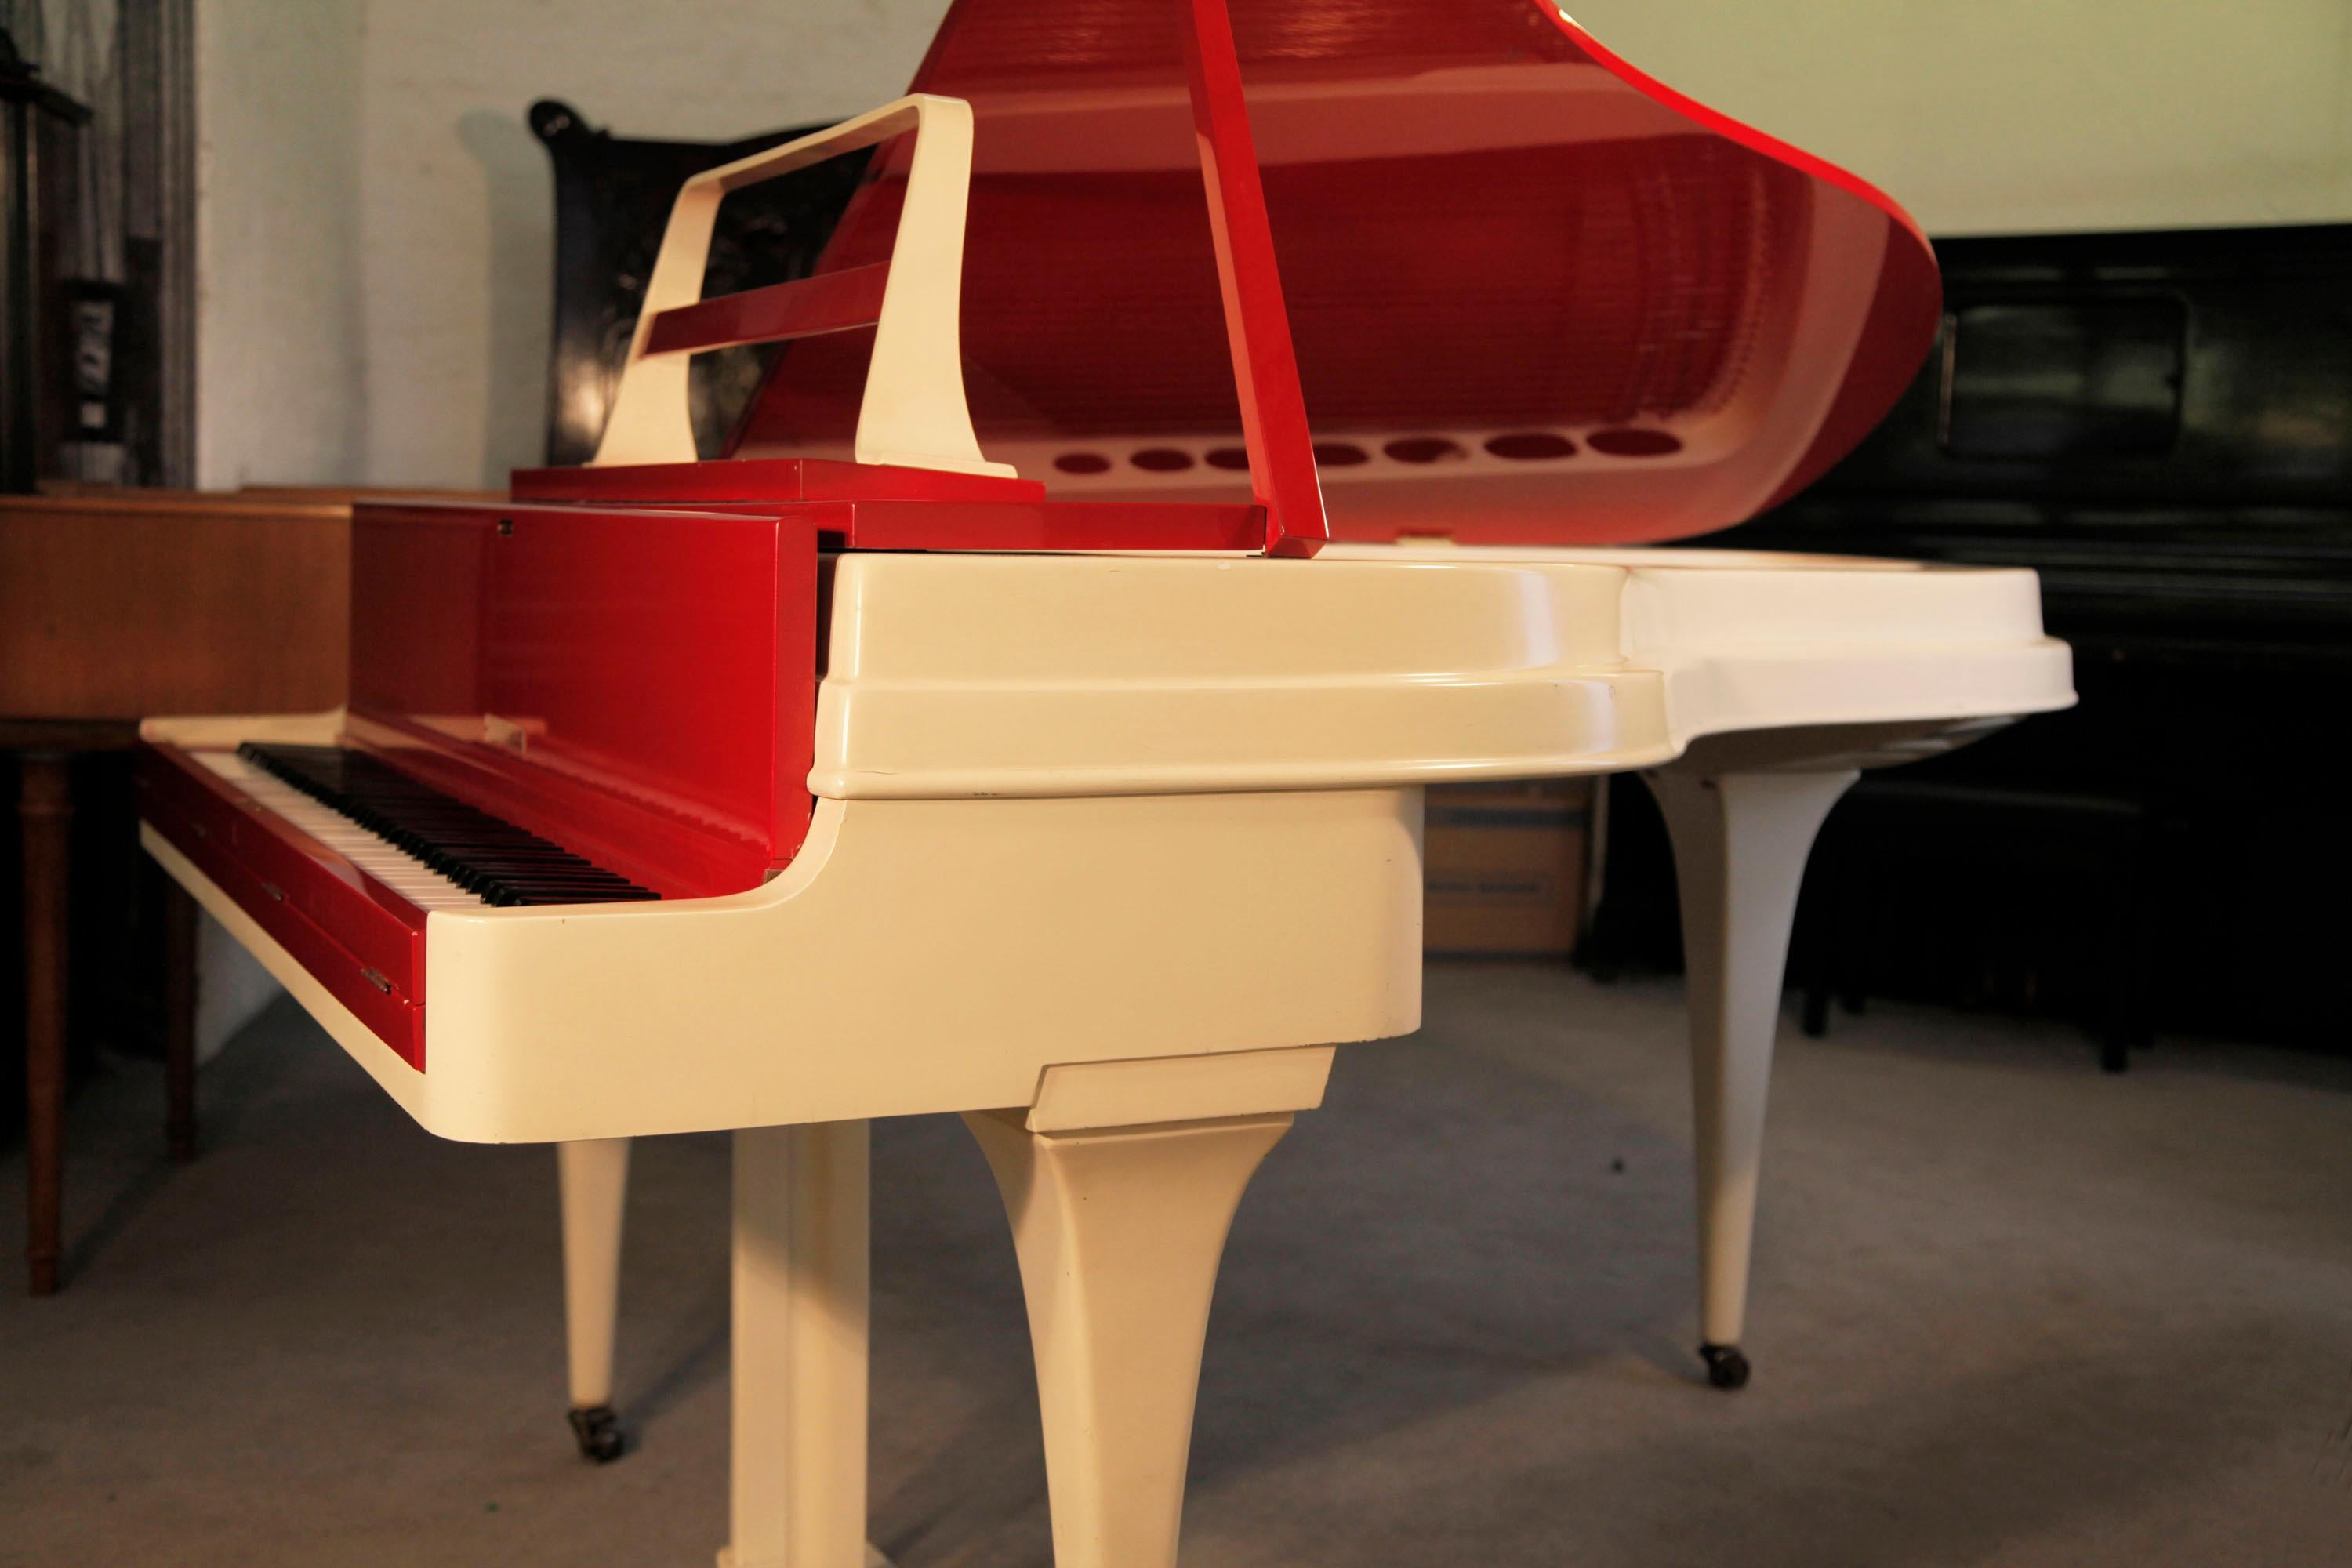 Aluminum Slimline, 1950's, Rippen Grand Piano in Cherry Polyester with an Aluminium Case